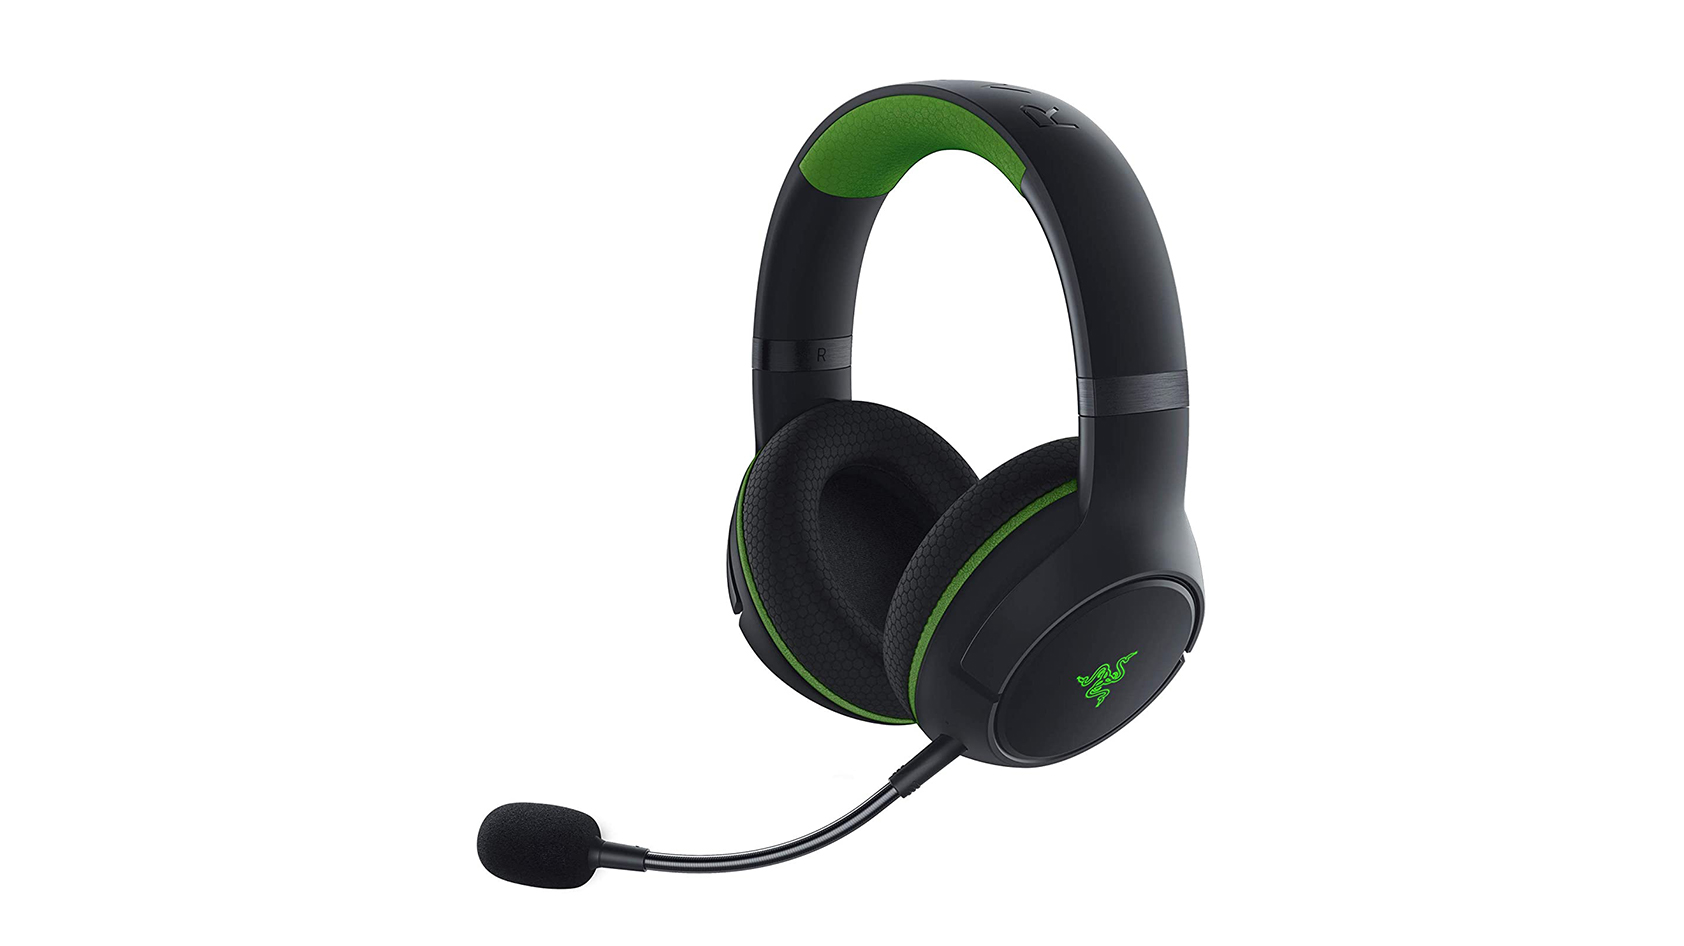 The Razer Kaira Pro gaming headset in black and neon green against a white background.